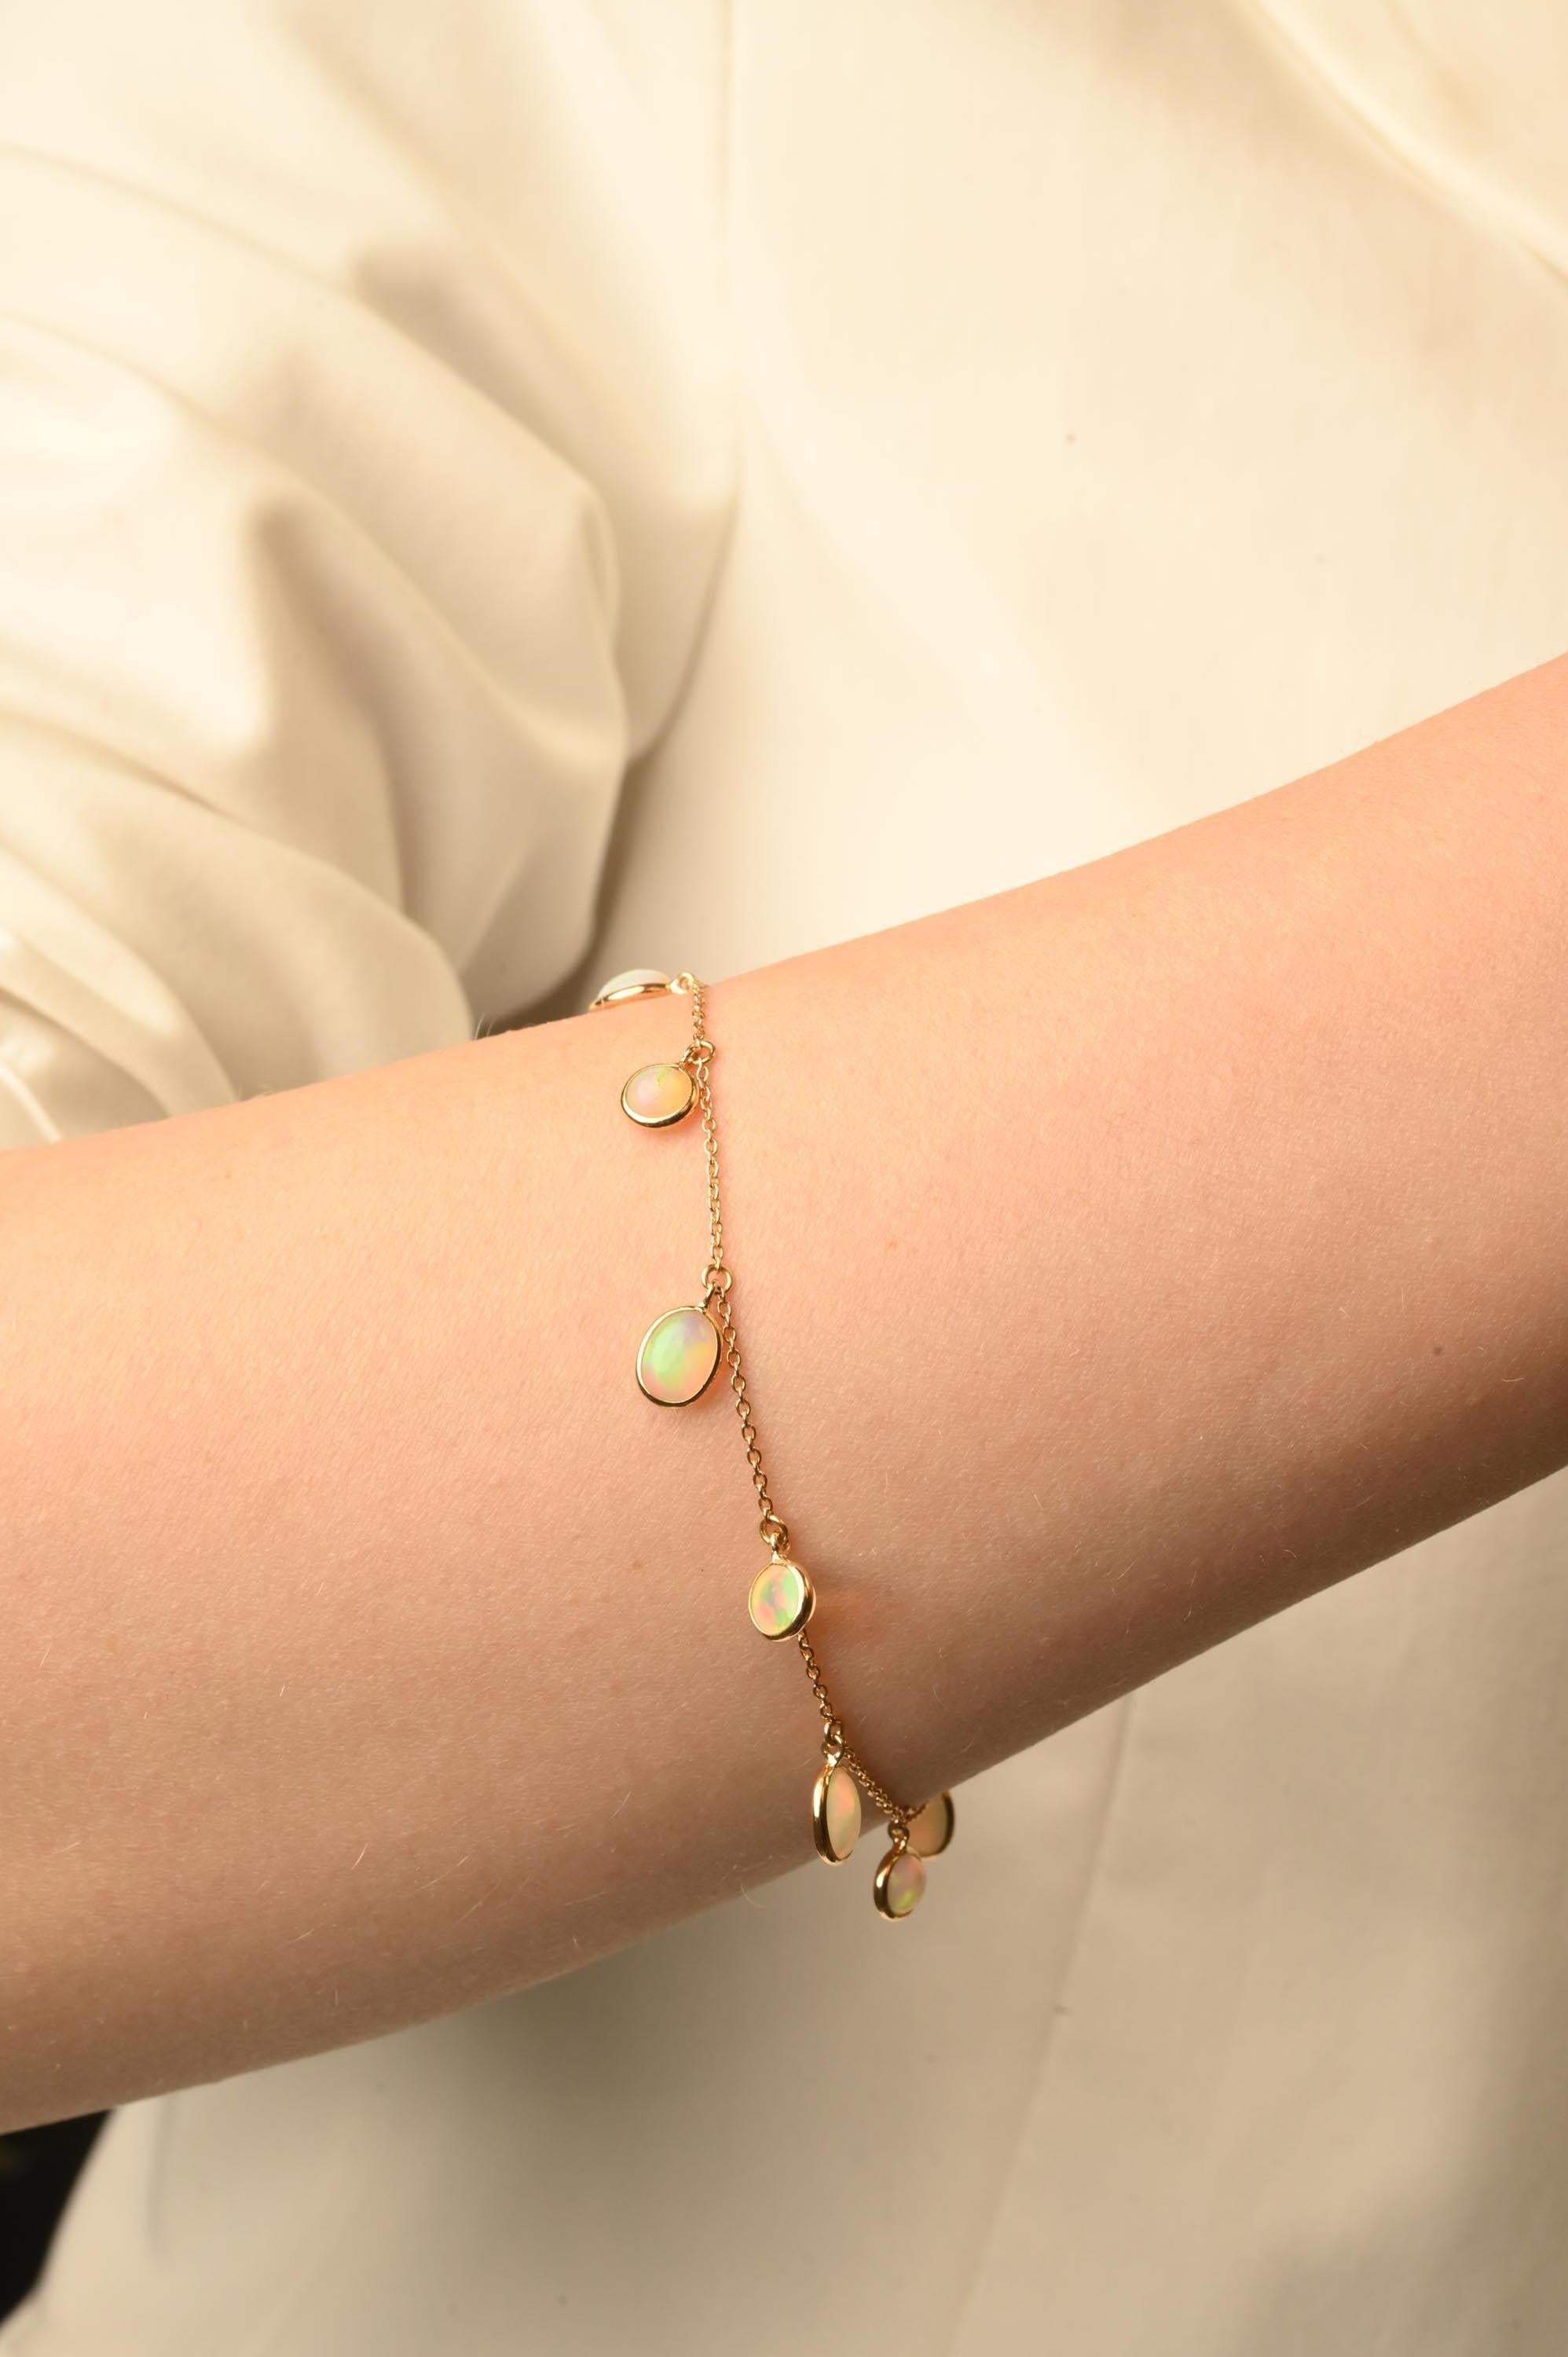 Modern Everloving Opal Stackable Dangling Chain Bracelet in Solid 18k Yellow Gold For Sale